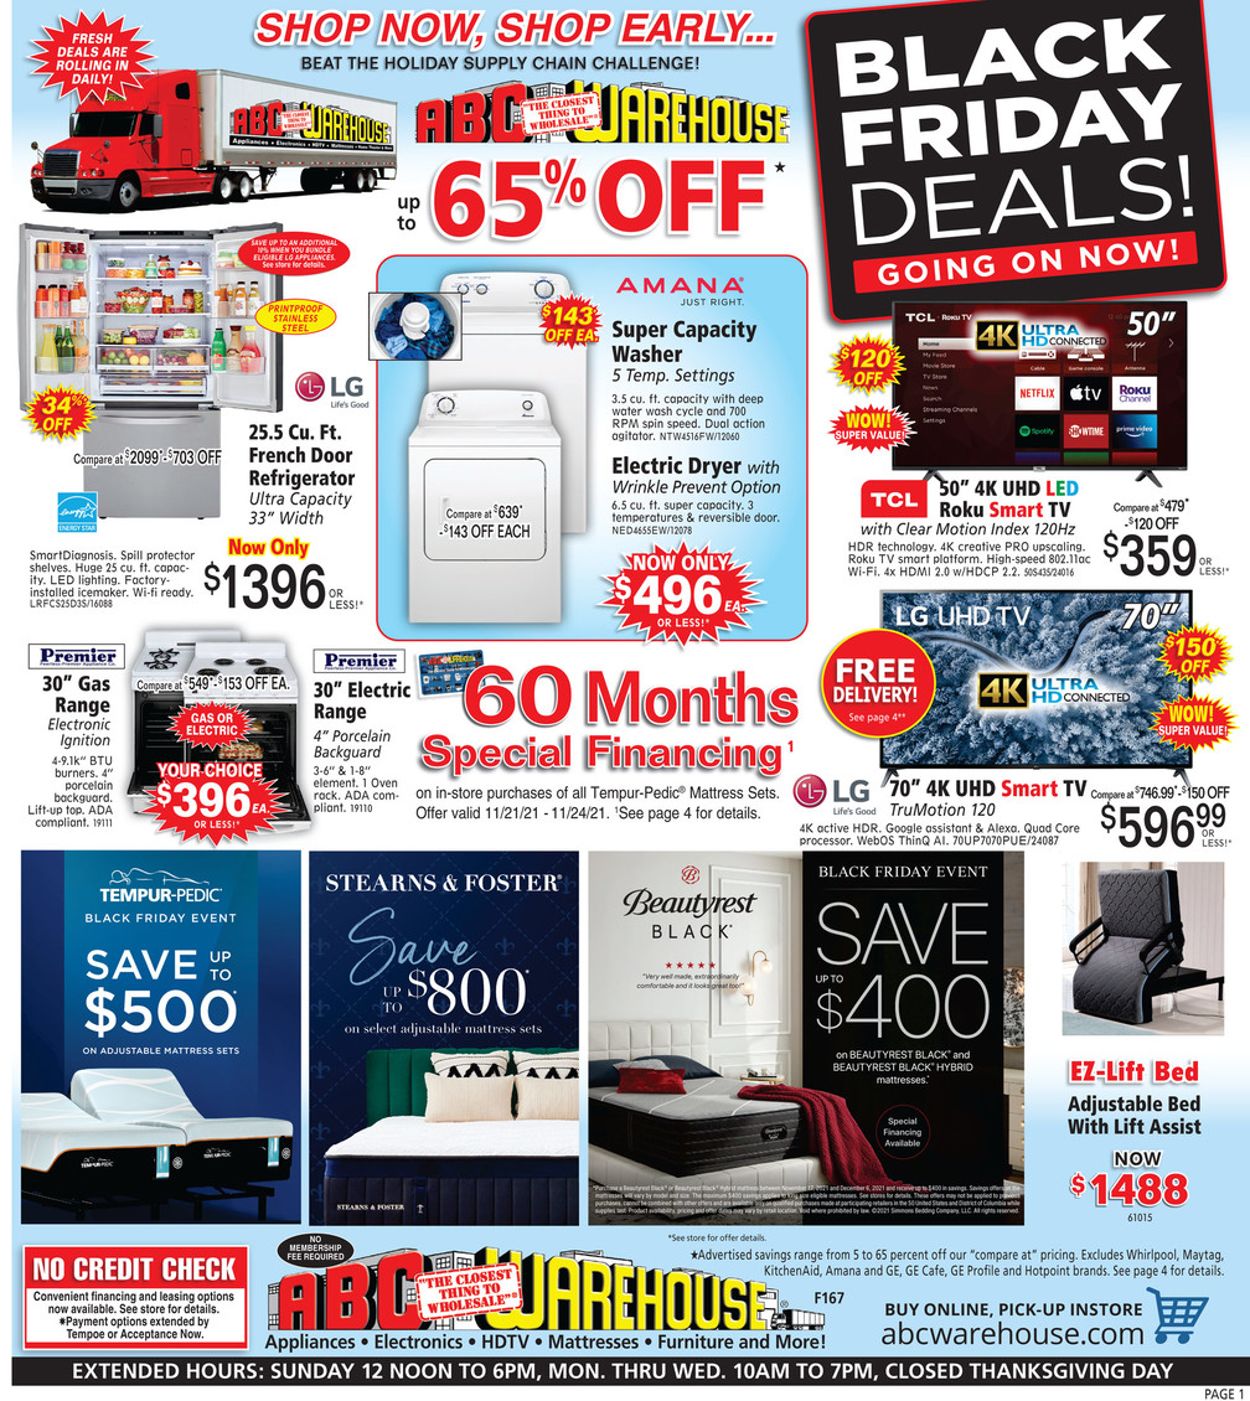 ABC Warehouse BLACK FRIDAY AD 2021 Current weekly ad 11/21 11/24/2021